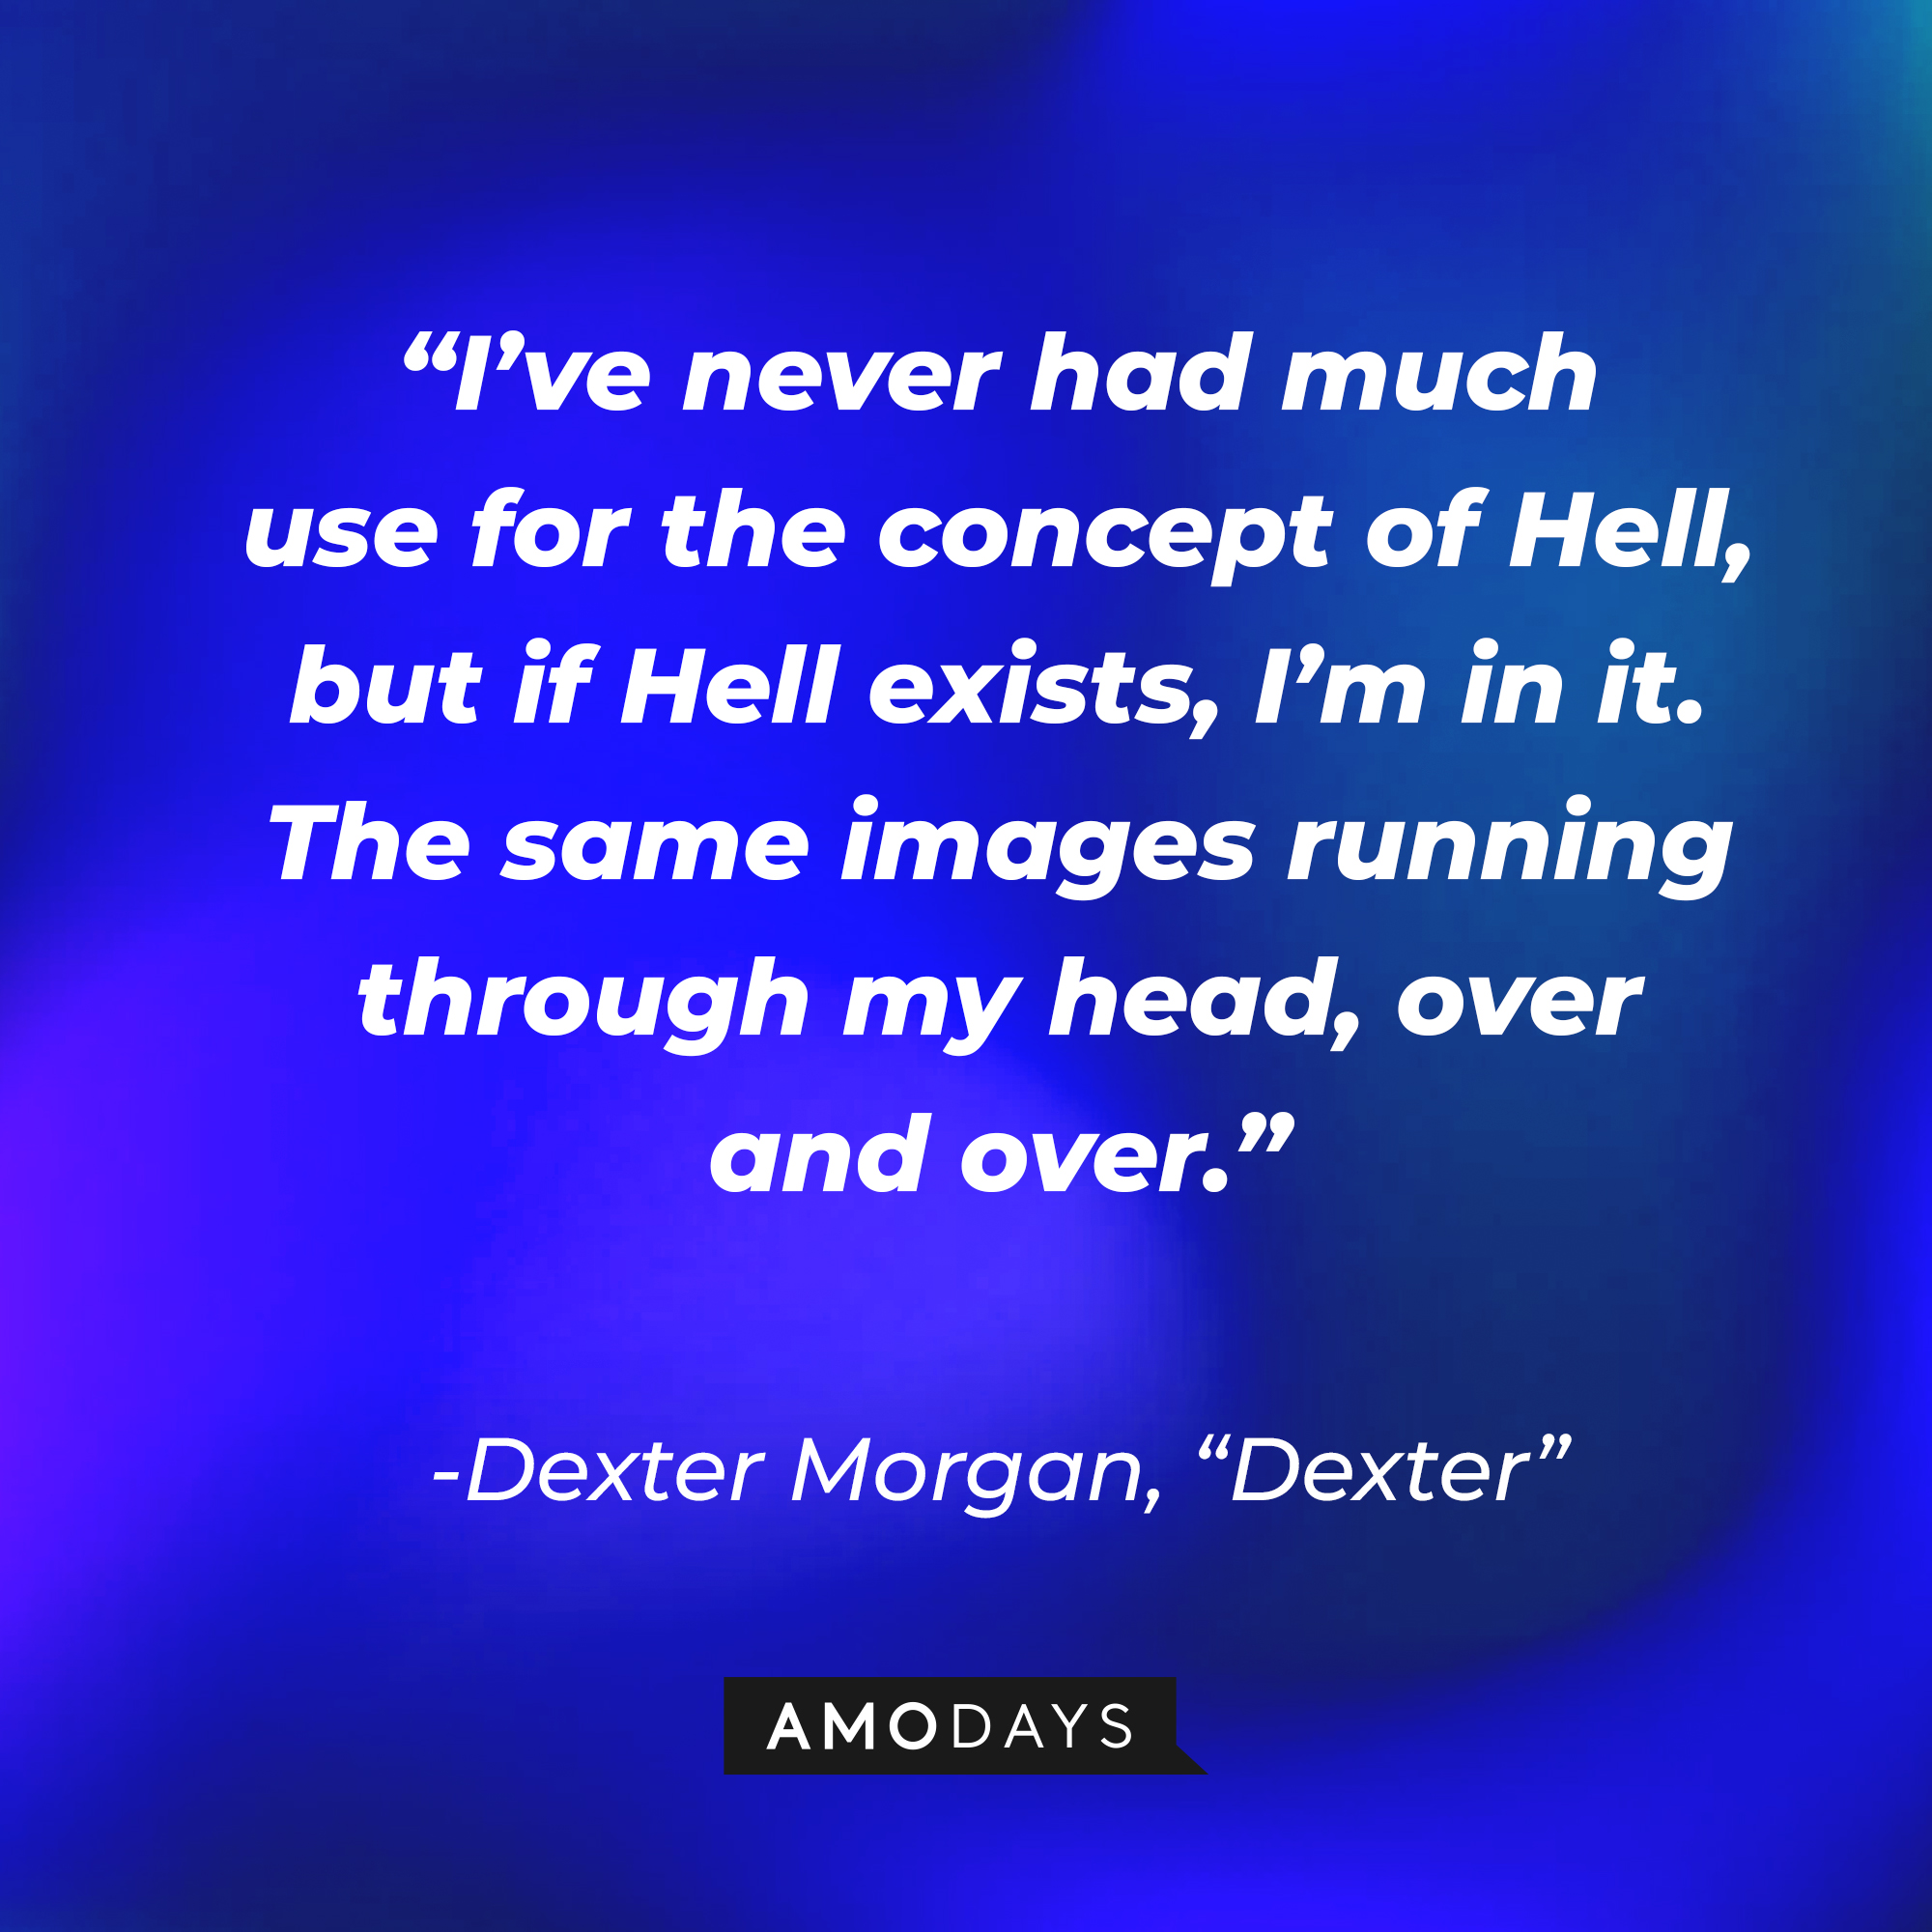 Dexter Morgan's quote from "Dexter:" “I’ve never had much use for the concept of Hell, but if Hell exists, I’m in it. The same images running through my head, over and over.” | Source: AmoDays